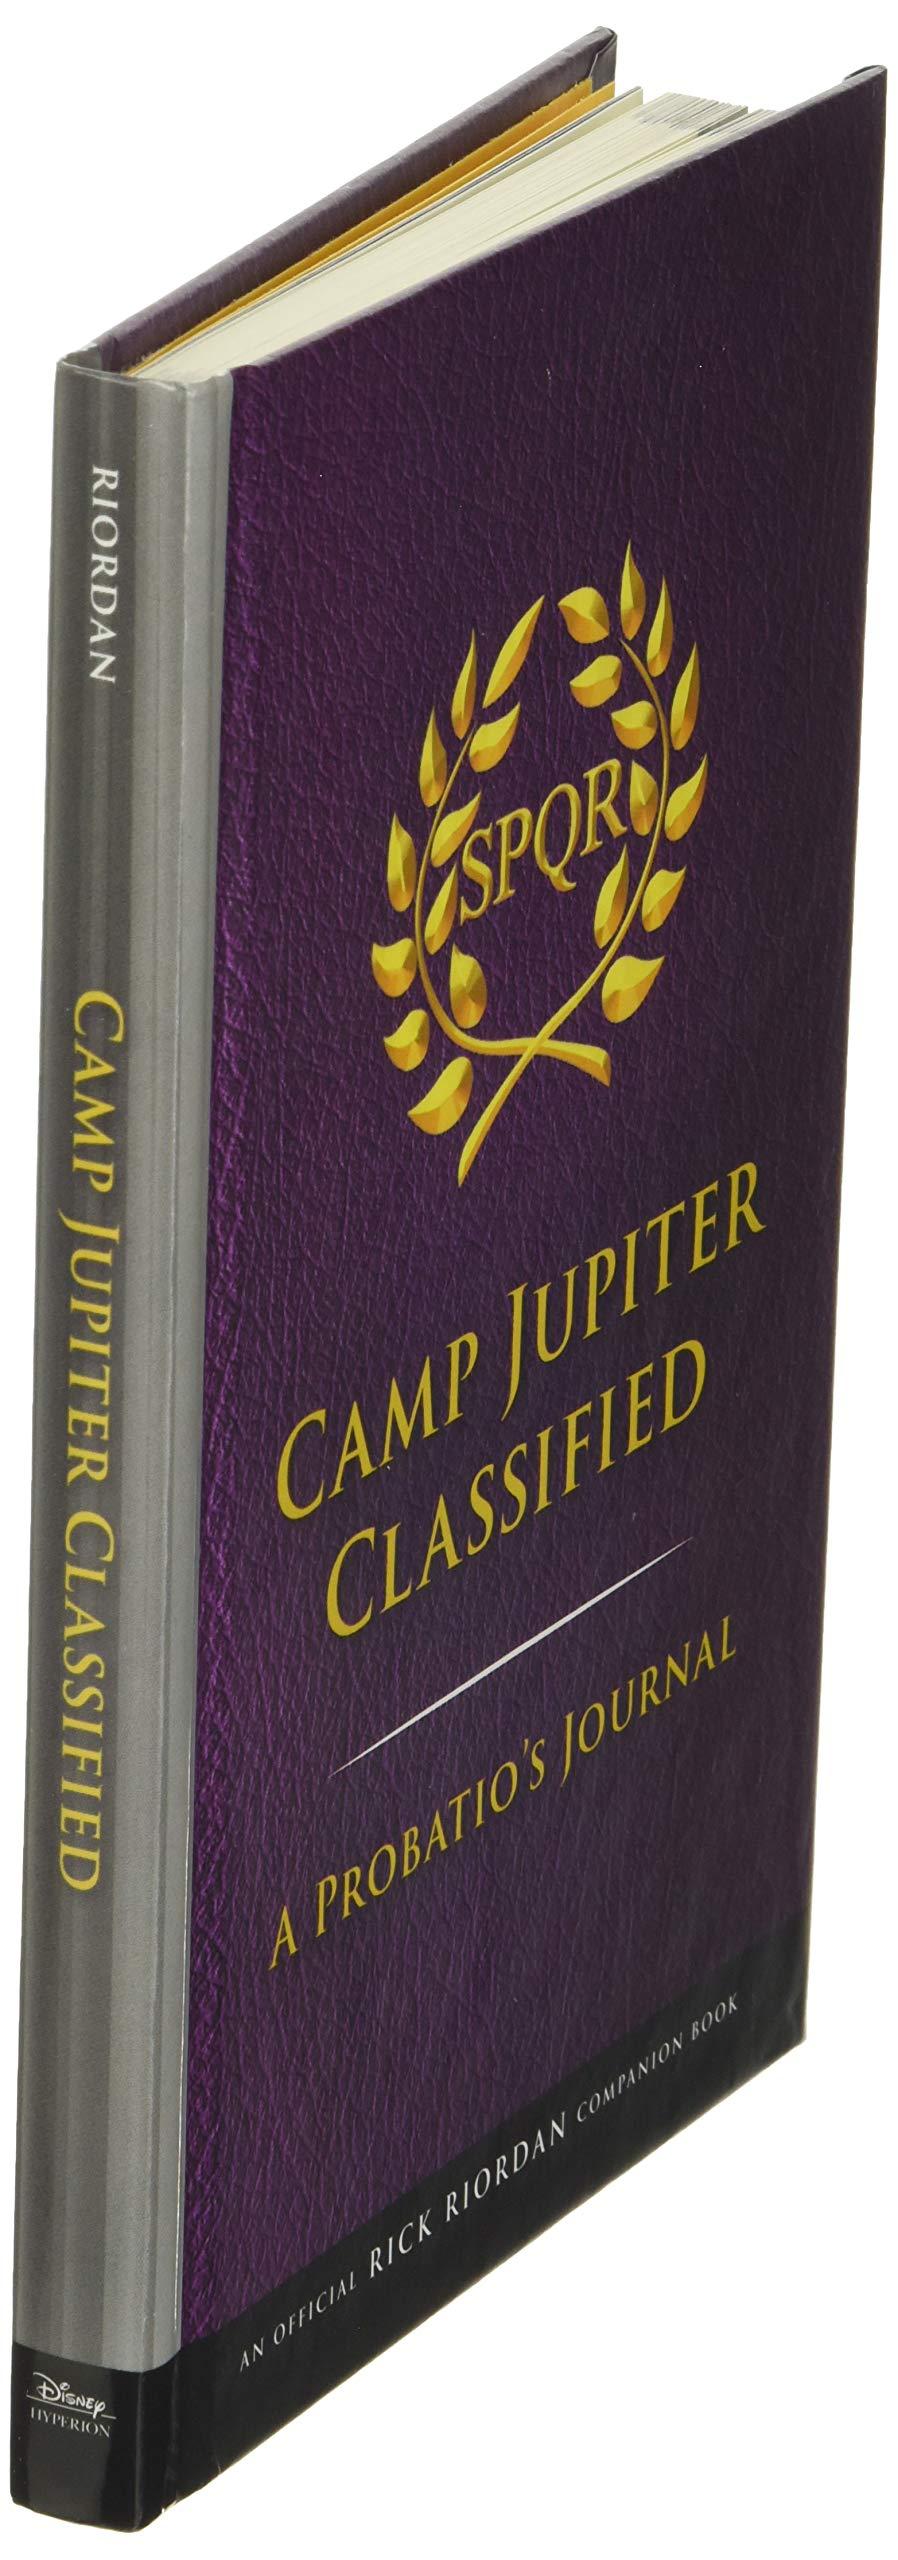 The Trials Of Apollo Camp Jupiter Classified (An Official Rick Riordan Companion Book): A Probatio's Journal